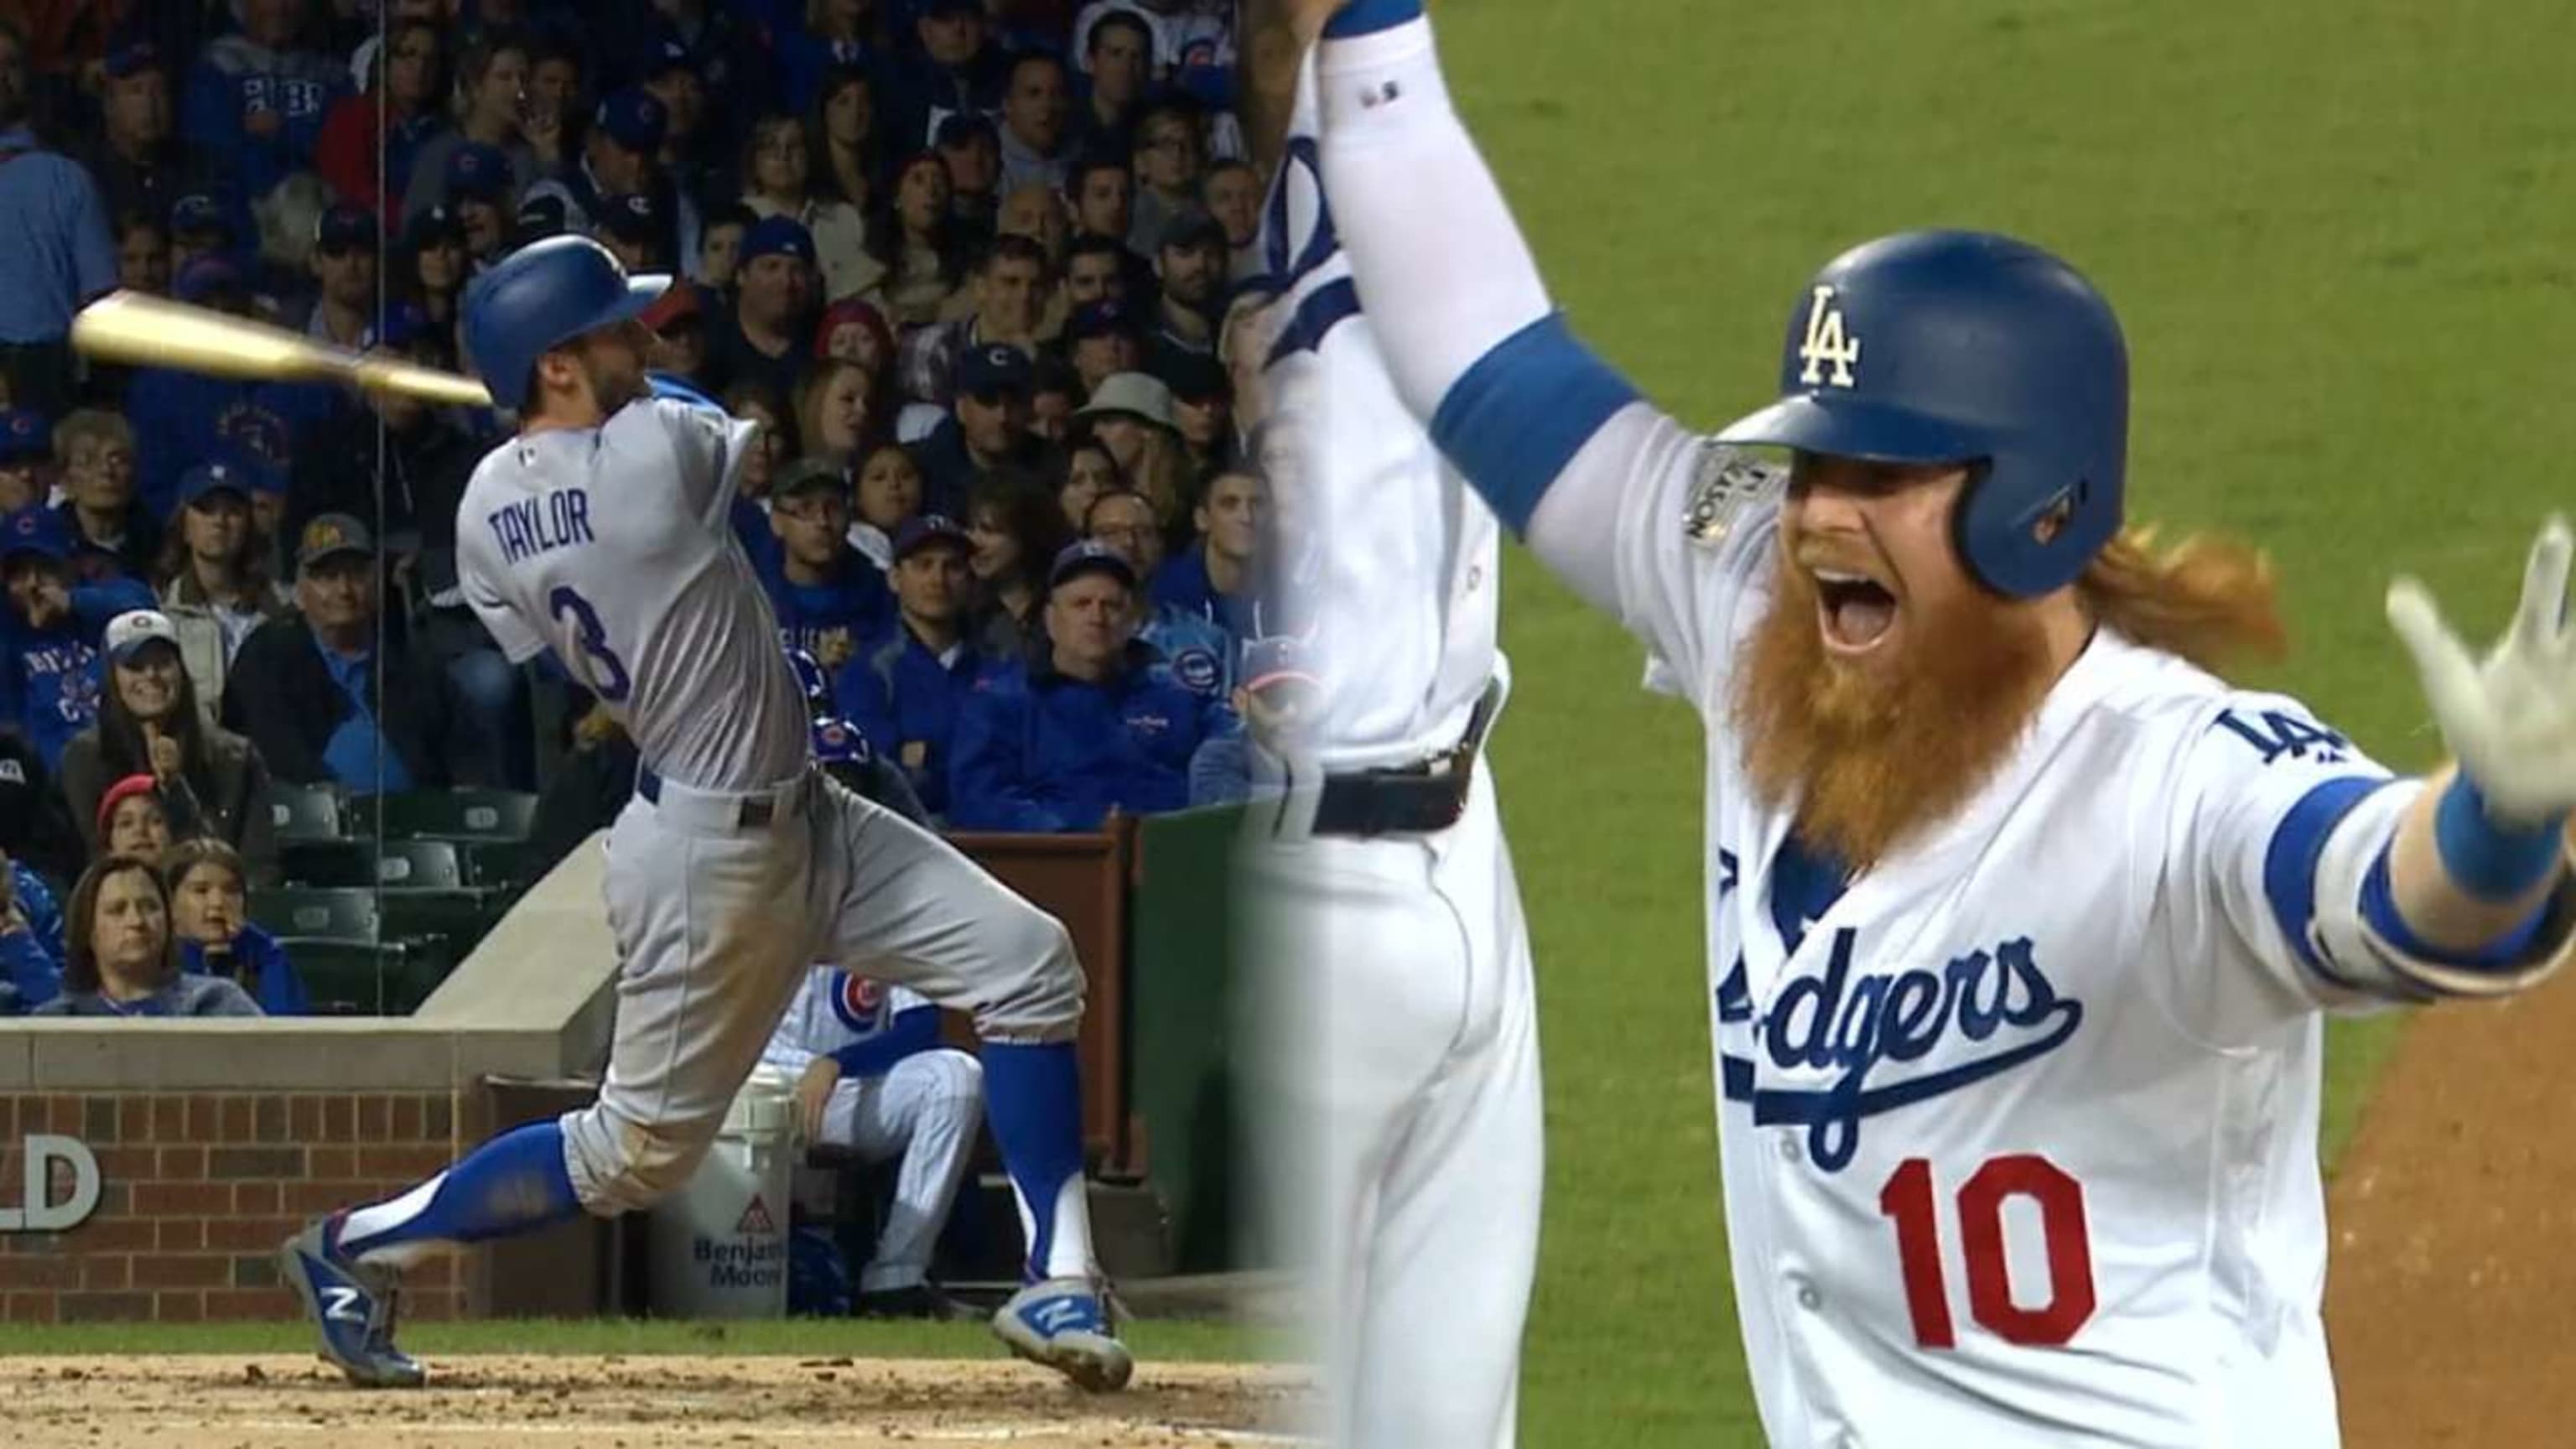 Dodgers rout Cubs 11-1 to win pennant, head to World Series for